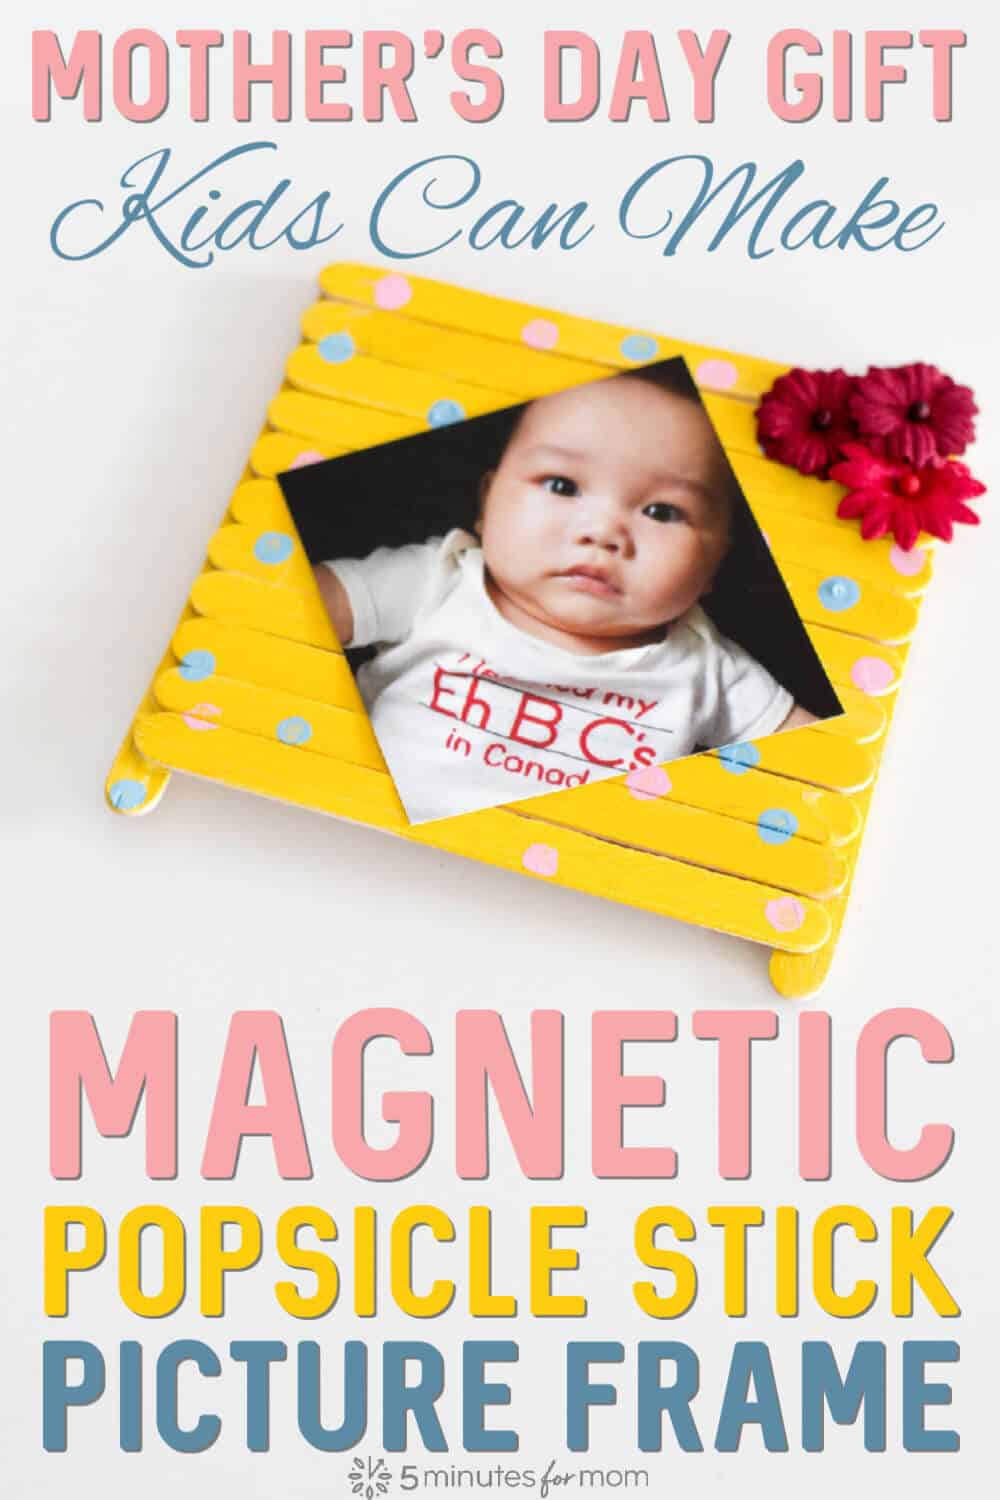 Magnetic Popsicle Stick Picture Frame - Mothers Day Gift Kids Can Make